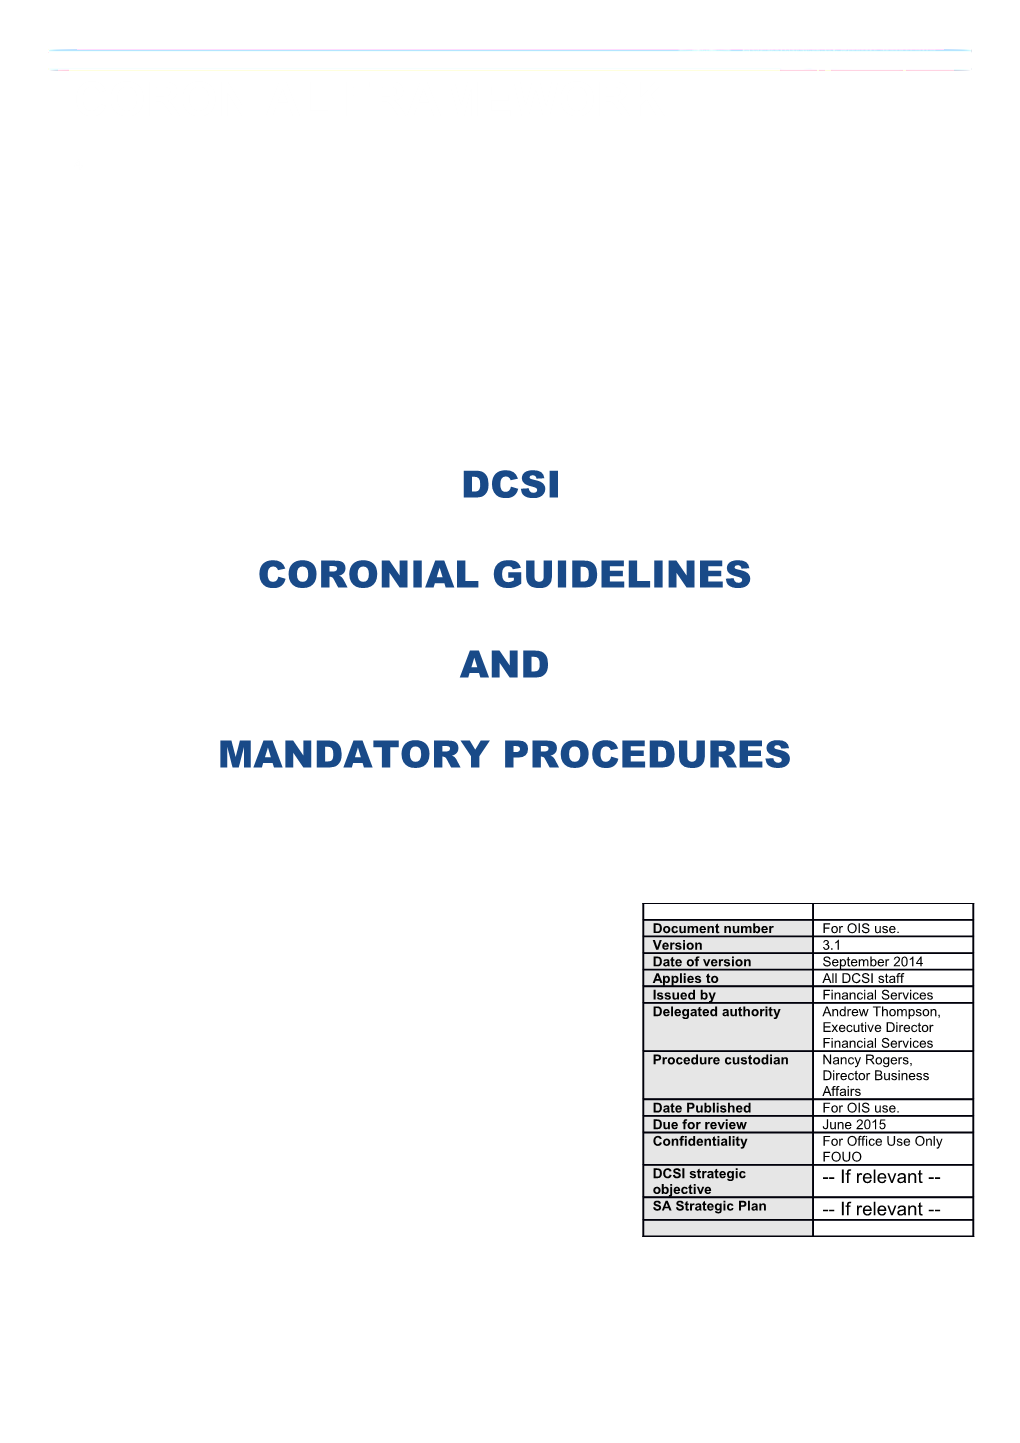 Information About DCSI Coronial Guidelines